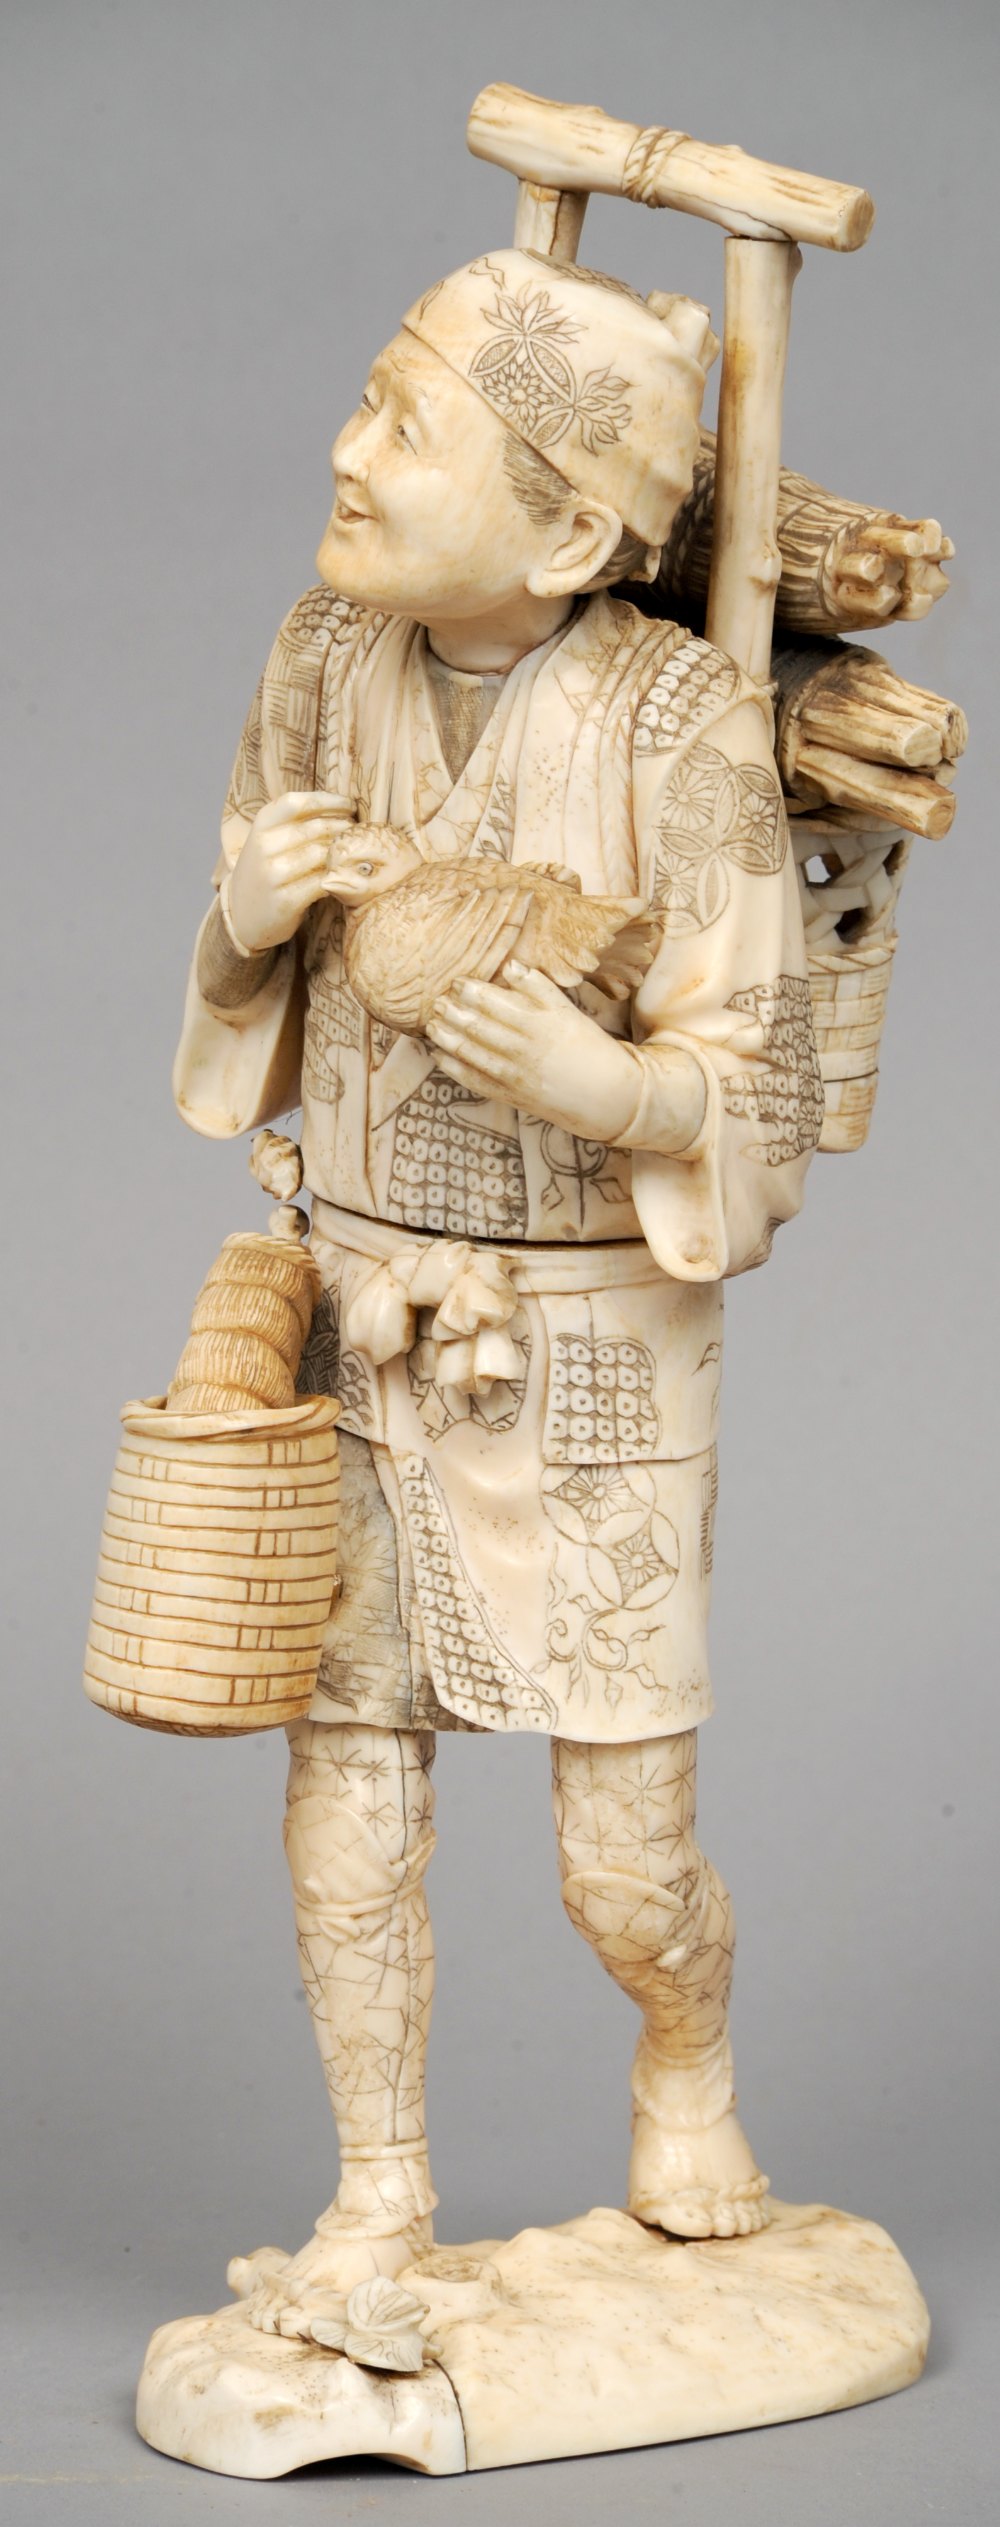 A large 19th century Japanese ivory okimono
Formed as a woodsman, modelled carrying bundles of